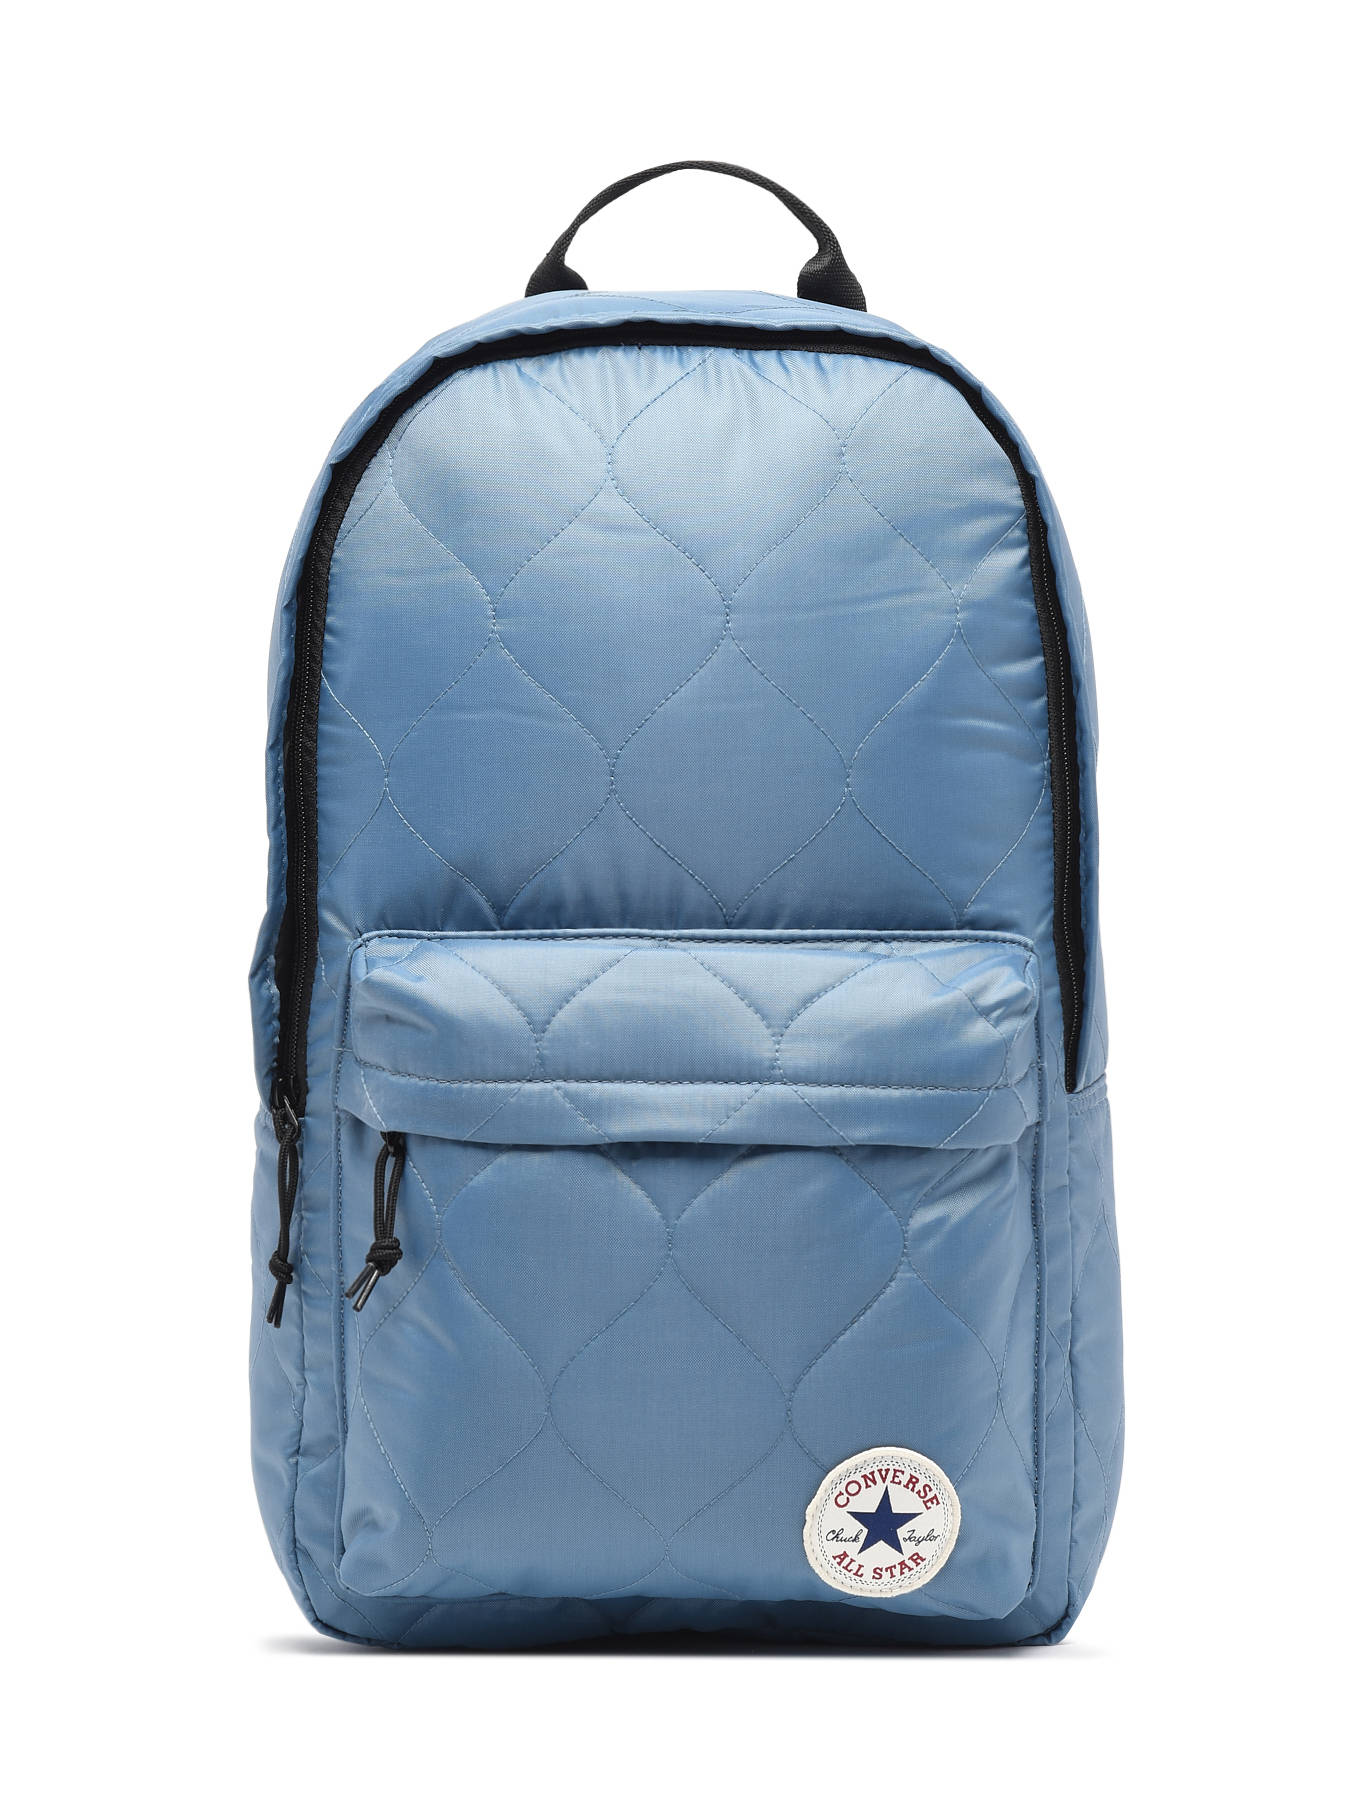 Converse Backpack - best prices